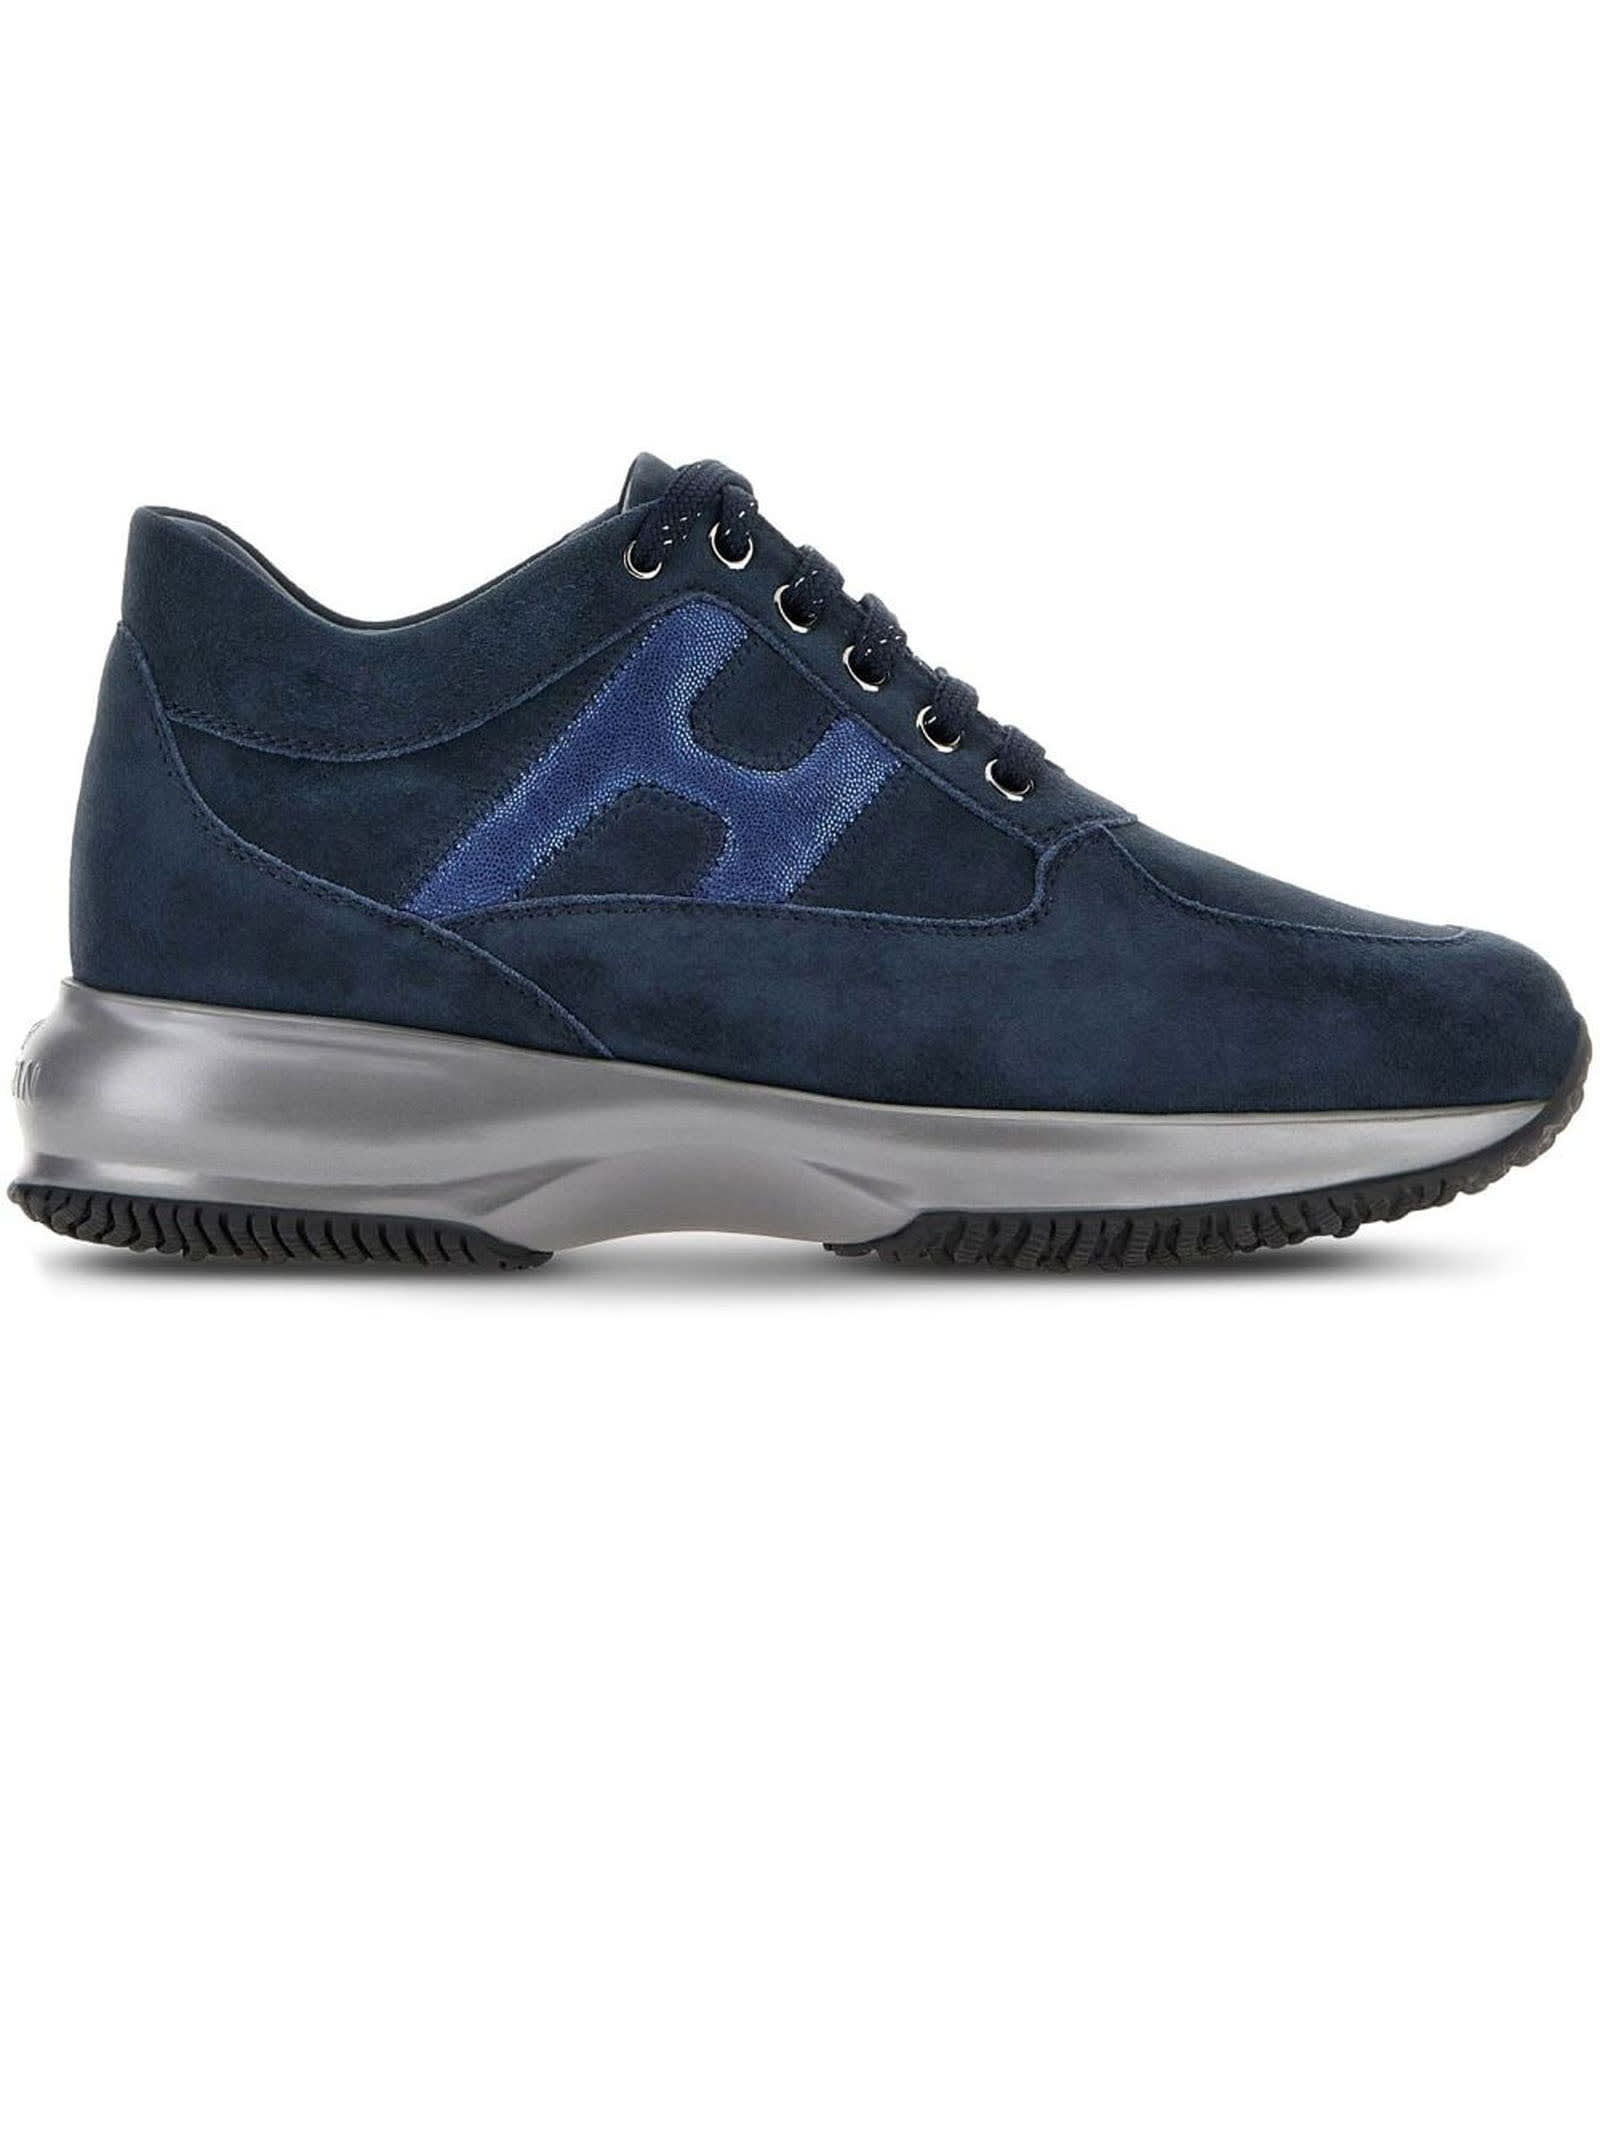 HOGAN BLUE LEATHER SNEAKERS